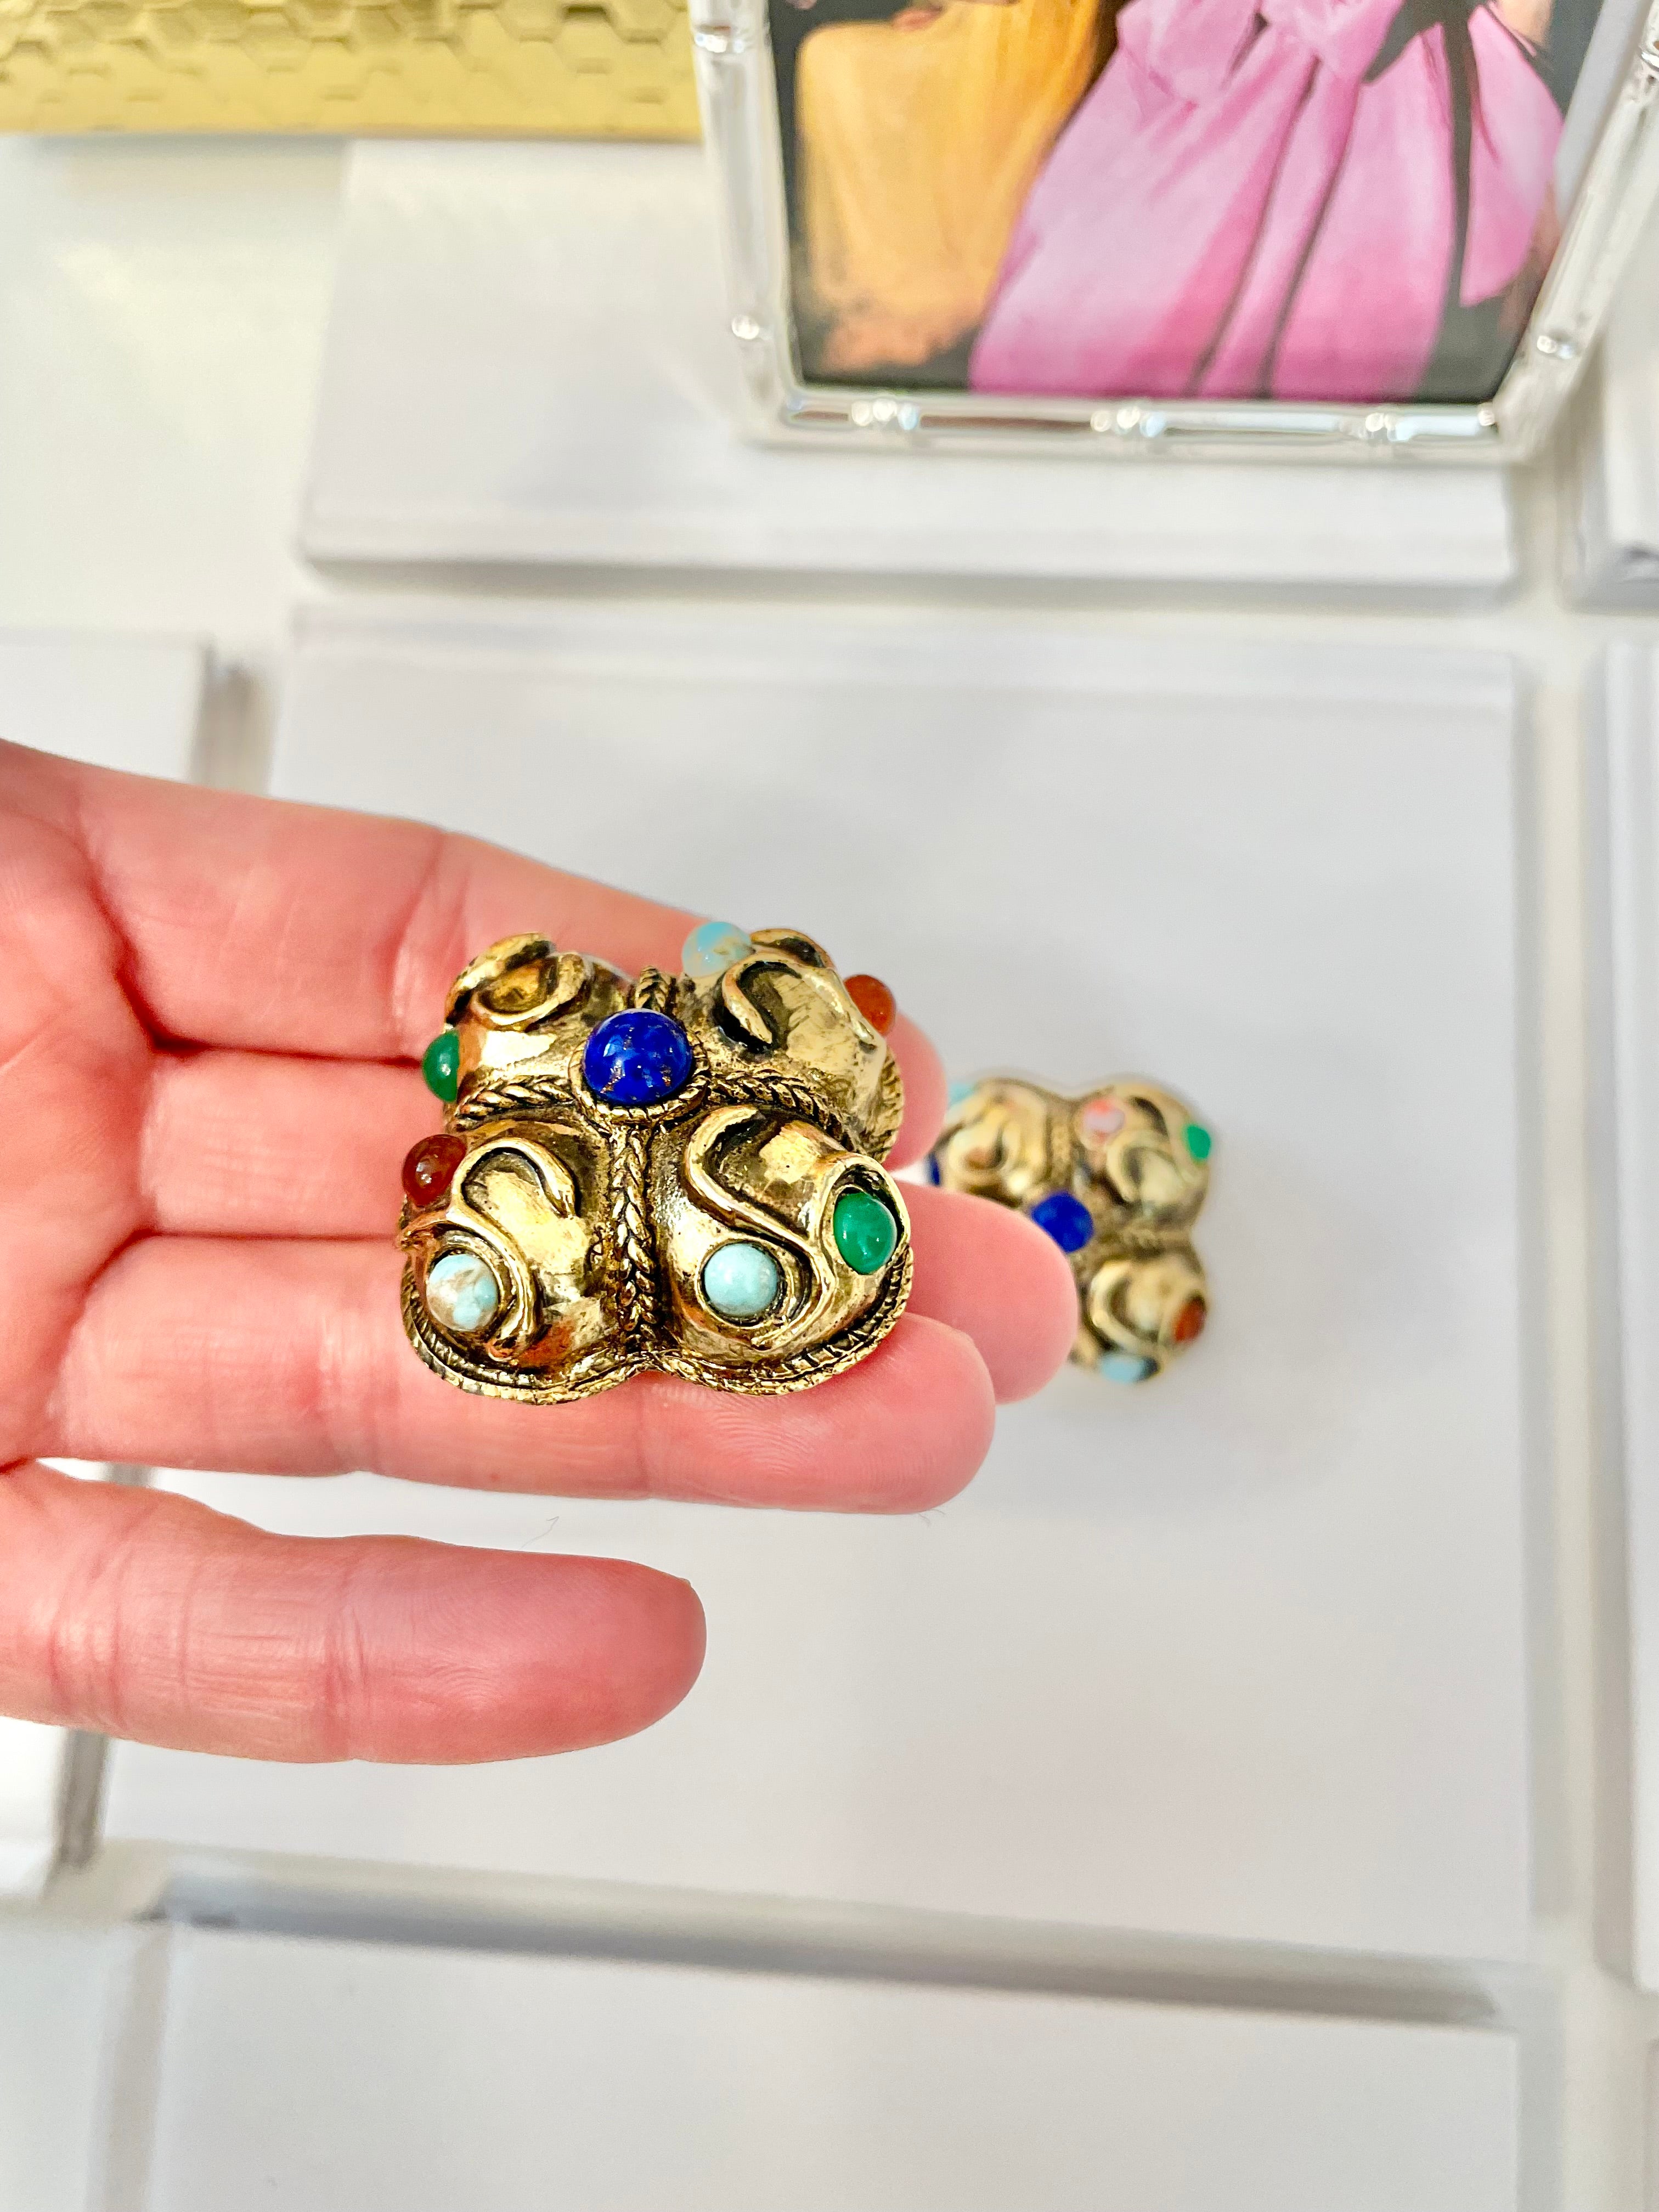 The Socialite and her love for the finest gems! These delightful gold and colorful gem earrings are extraordinary!!